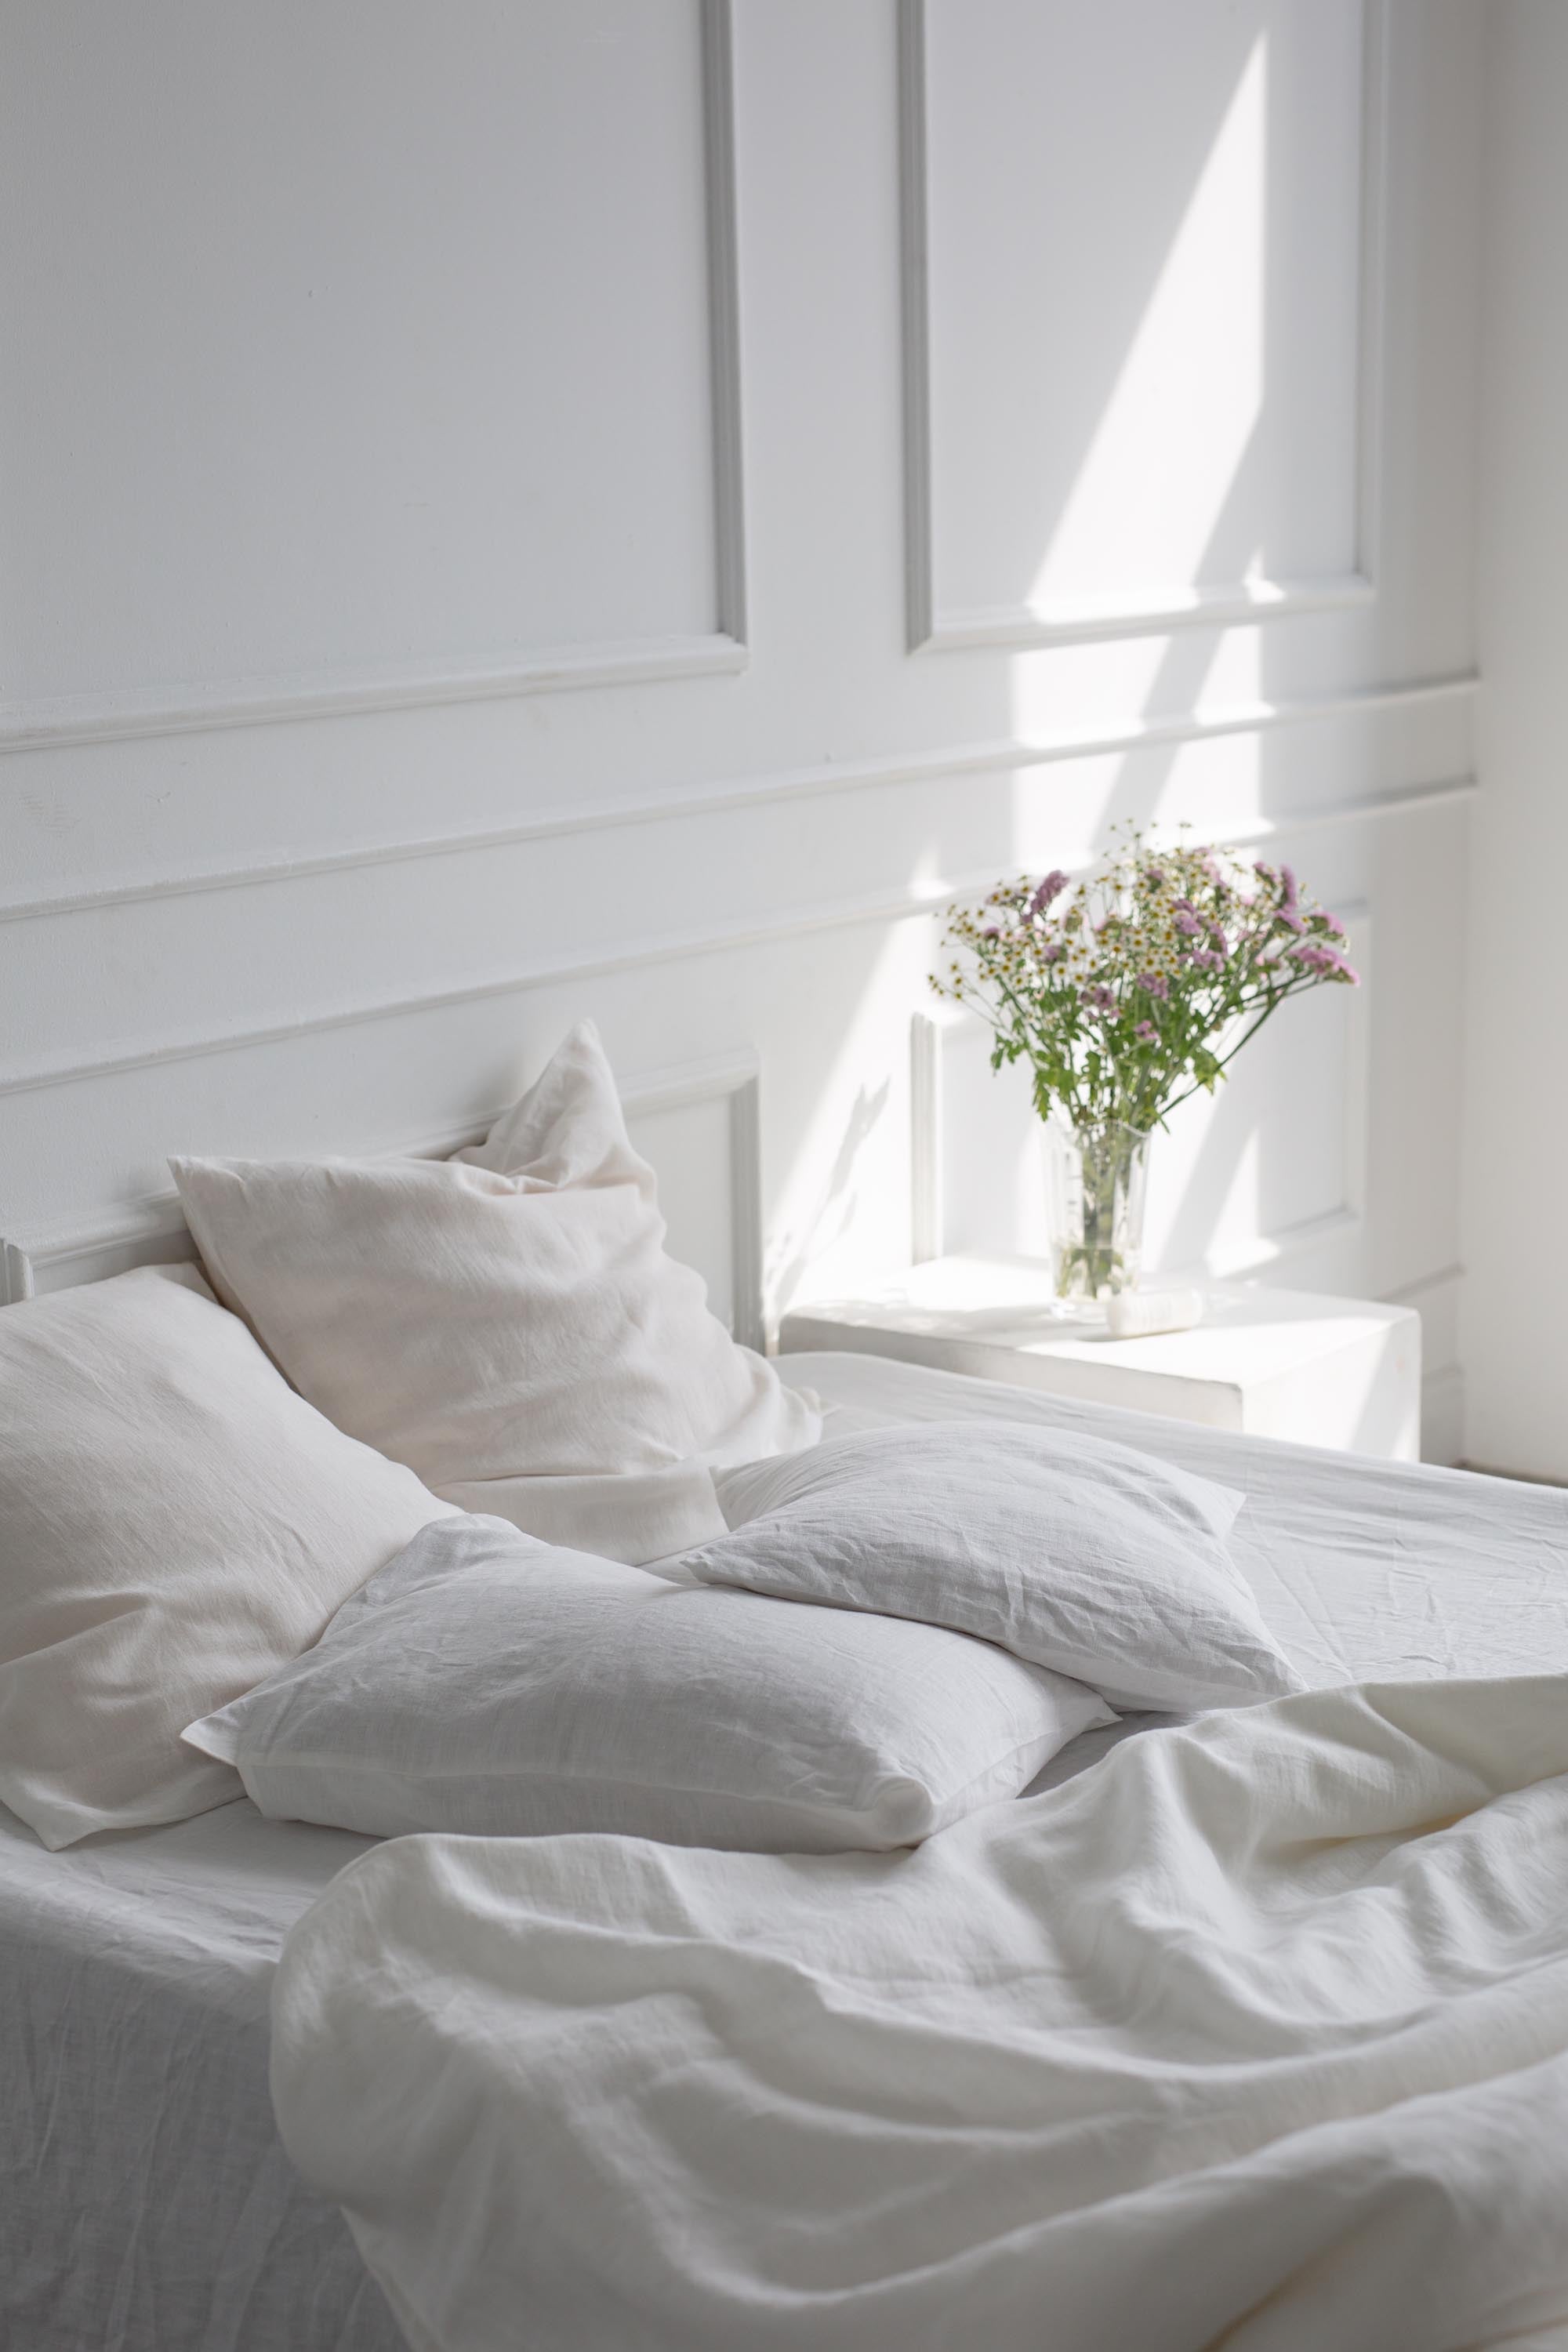 Undone Bed With White Linen Duvet Cover By AmourlInen